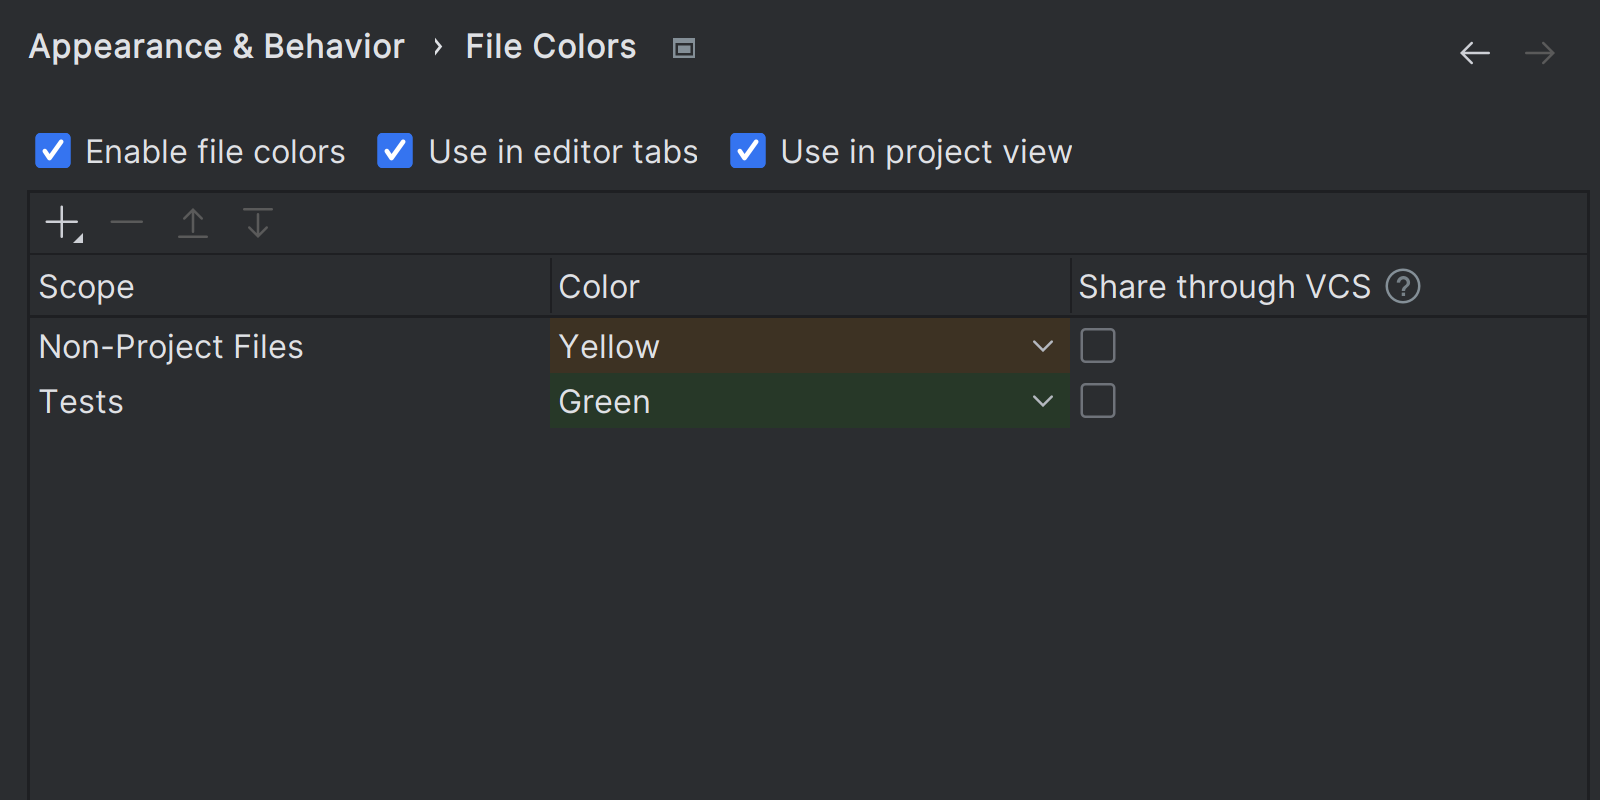 Under Appearance & behavior | File Colors it showing the dialog where teh Scope Non-Project Files is selected as Yellow and Tests the color chosen is Green.